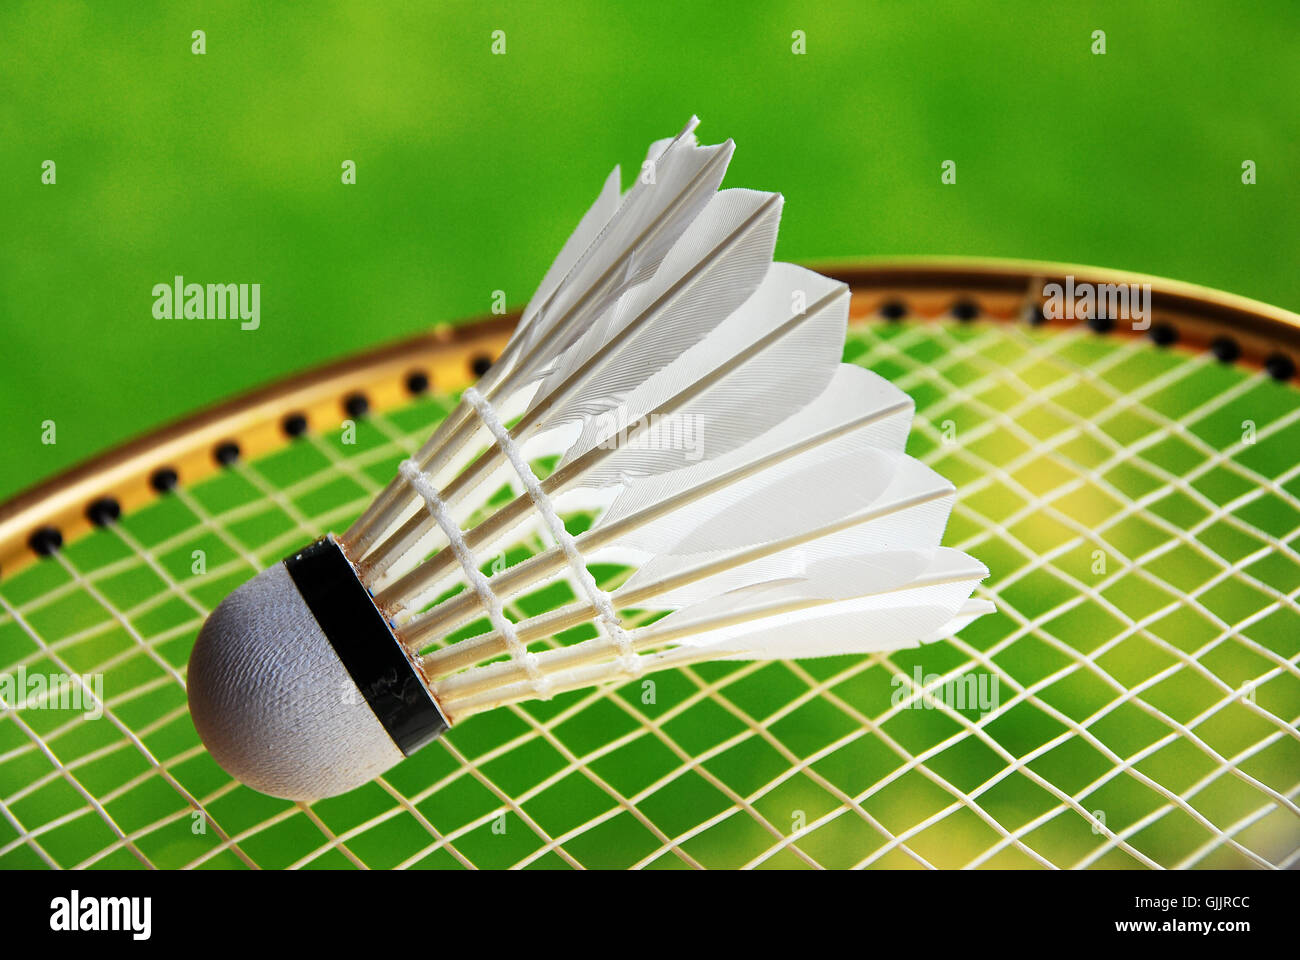 sport sports game Stock Photo